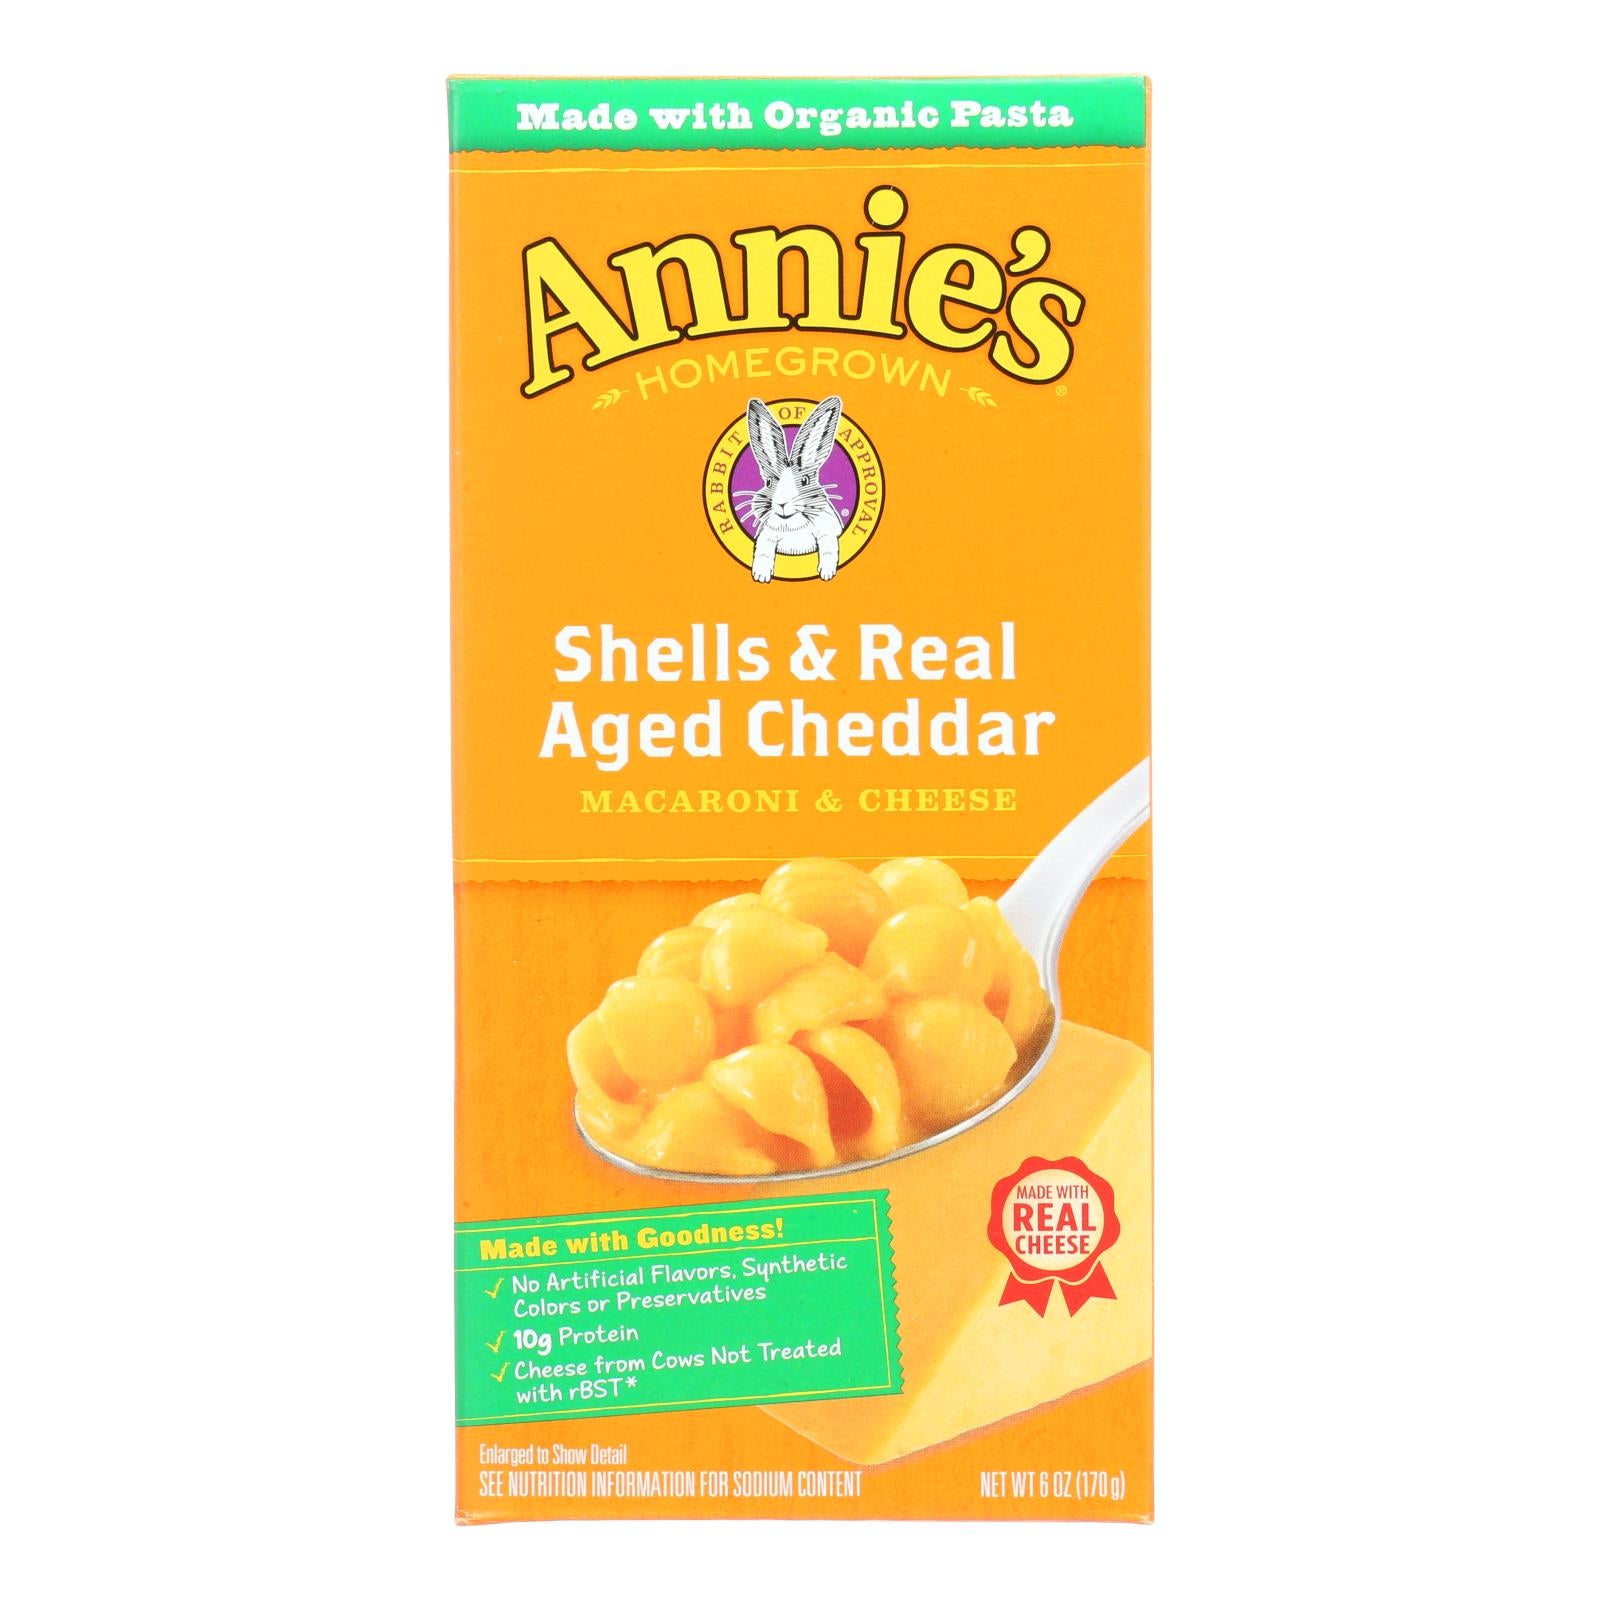 Annie'S Homegrown, Annies Homegrown Macaroni and Cheese - Organic - Shells and Real Aged Cheddar - 6 oz - case of 12 (Pack of 12)